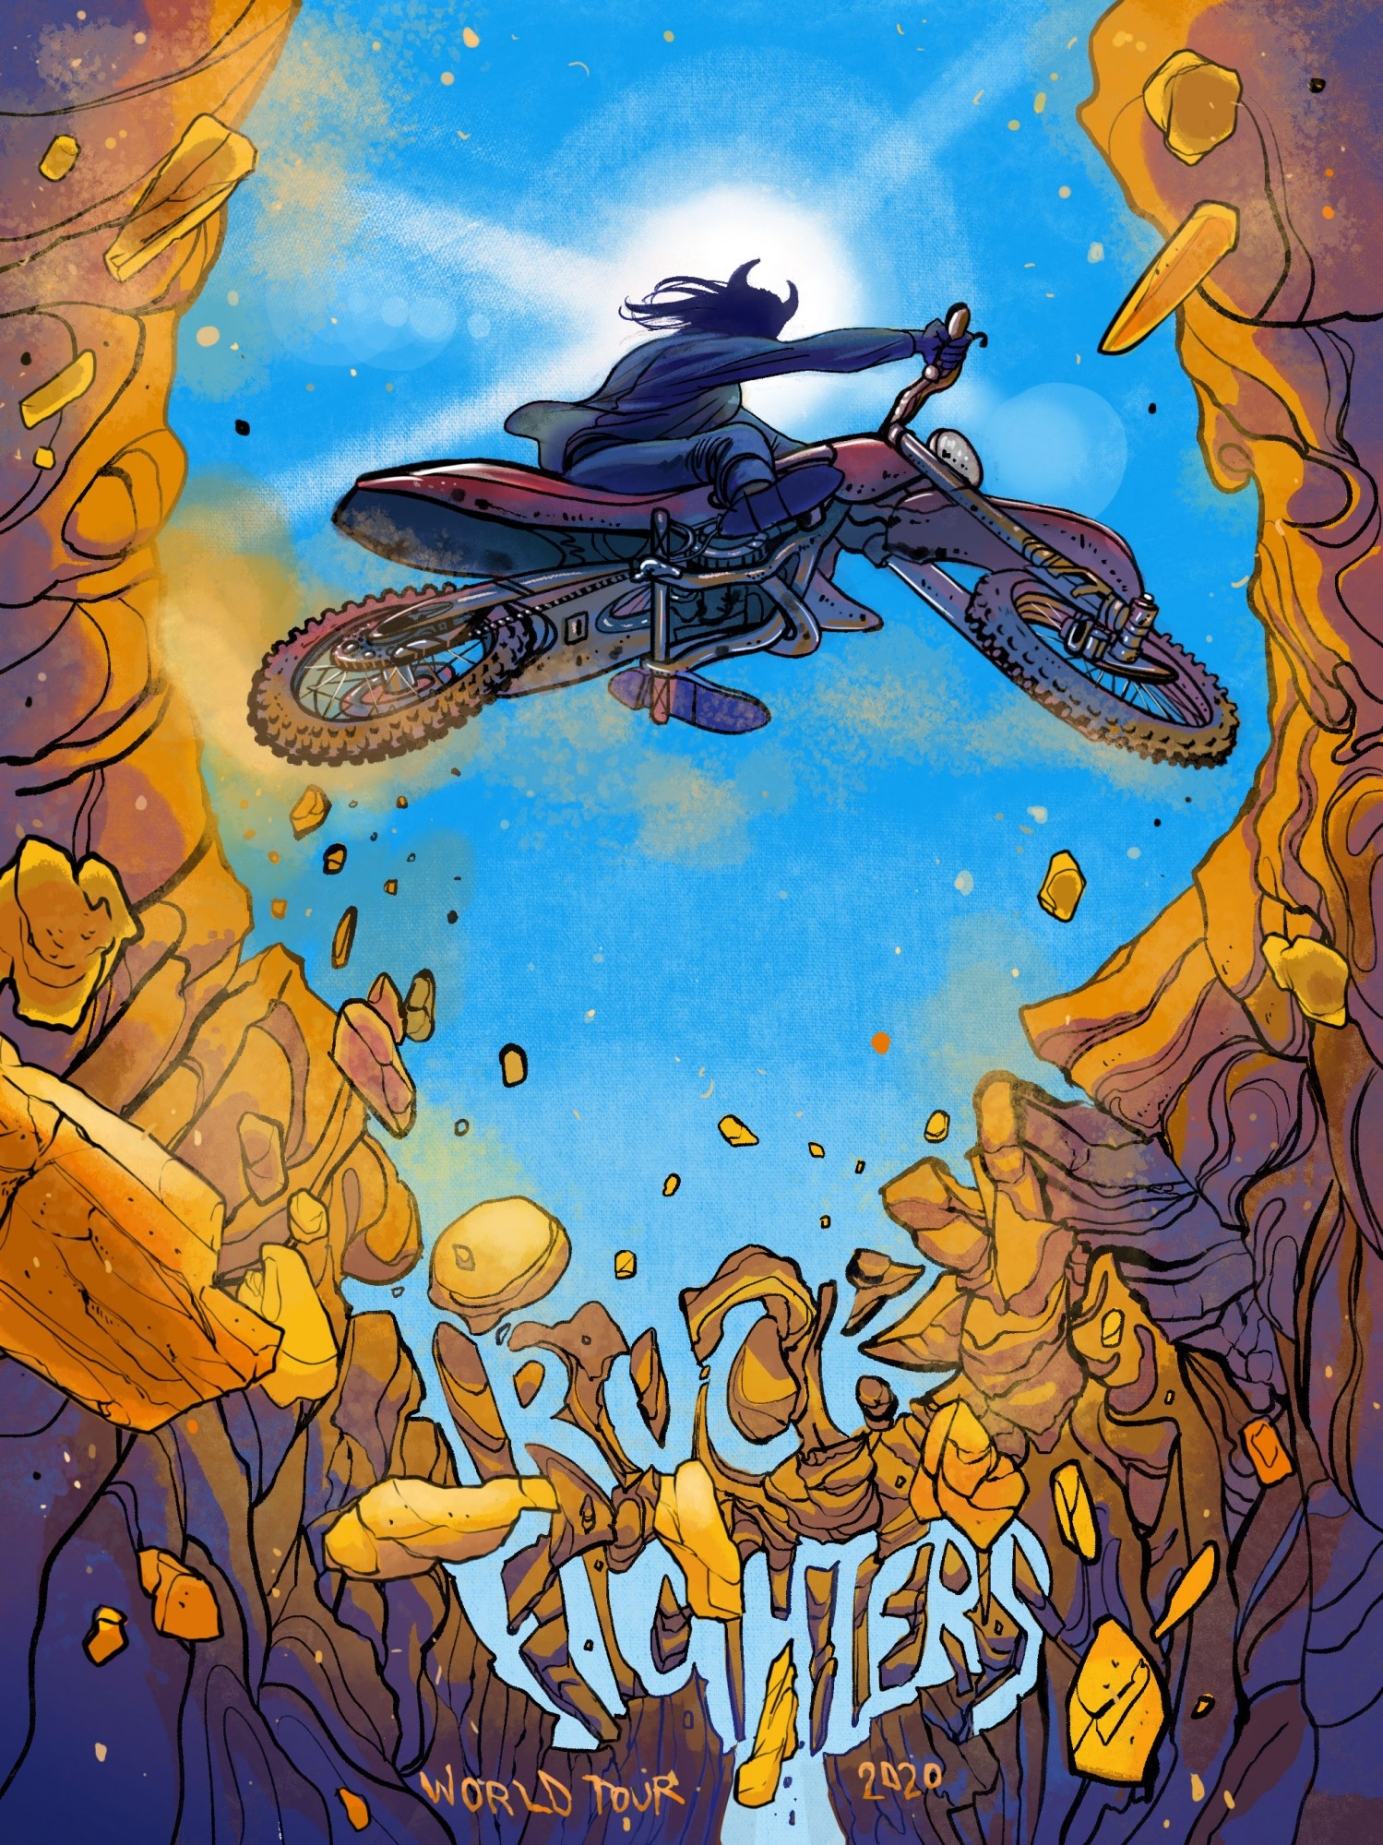 Truckfighters World Tour 2020 Poster